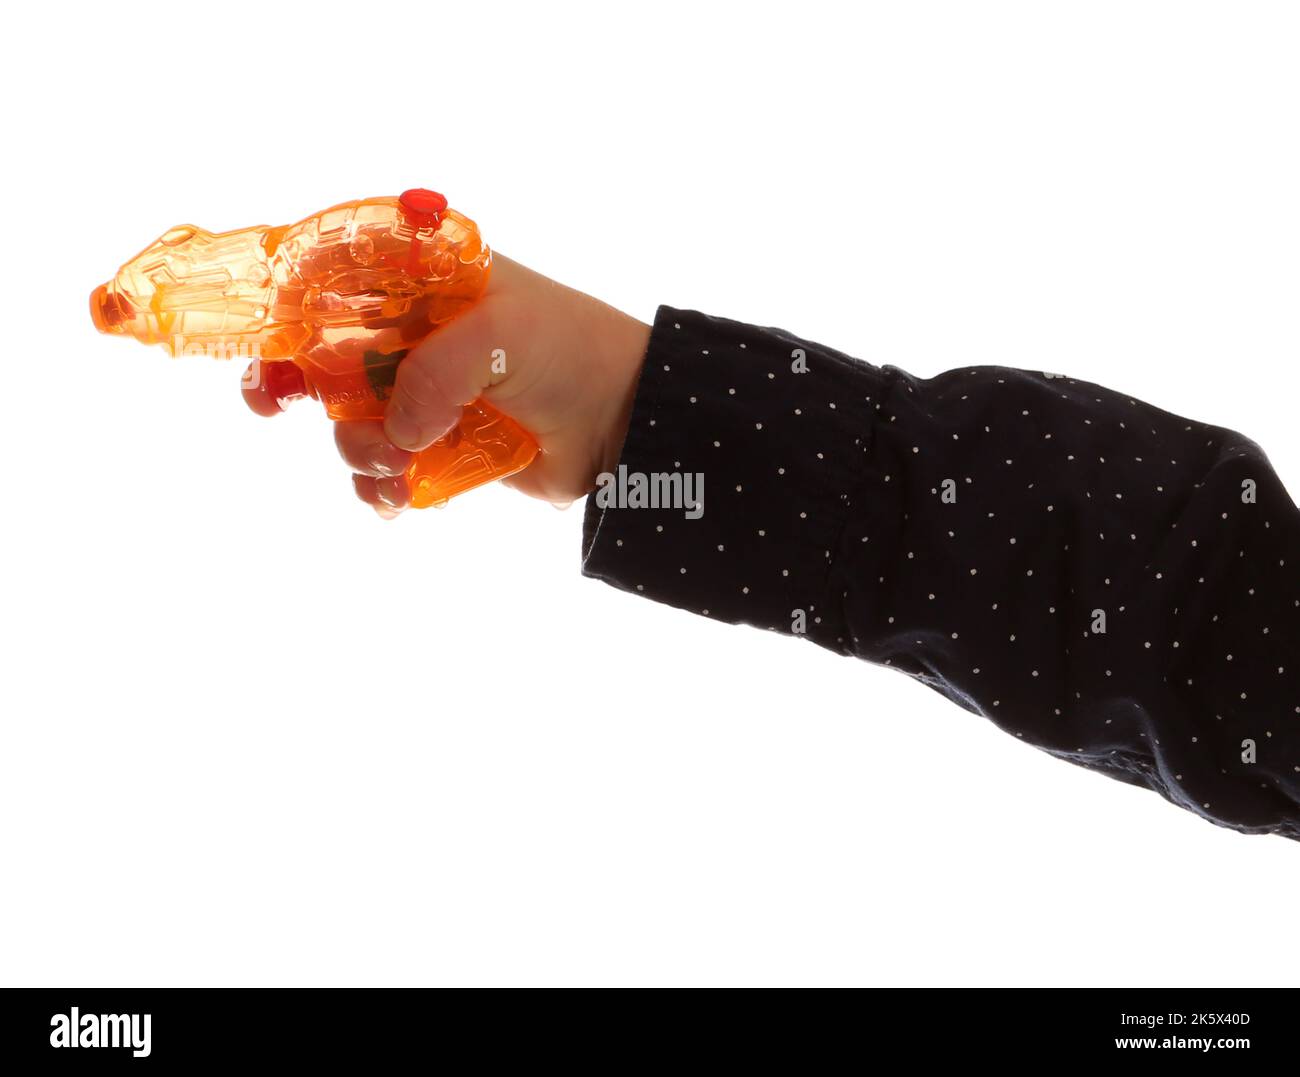 Child holding a water pistol on a white background Stock Photo